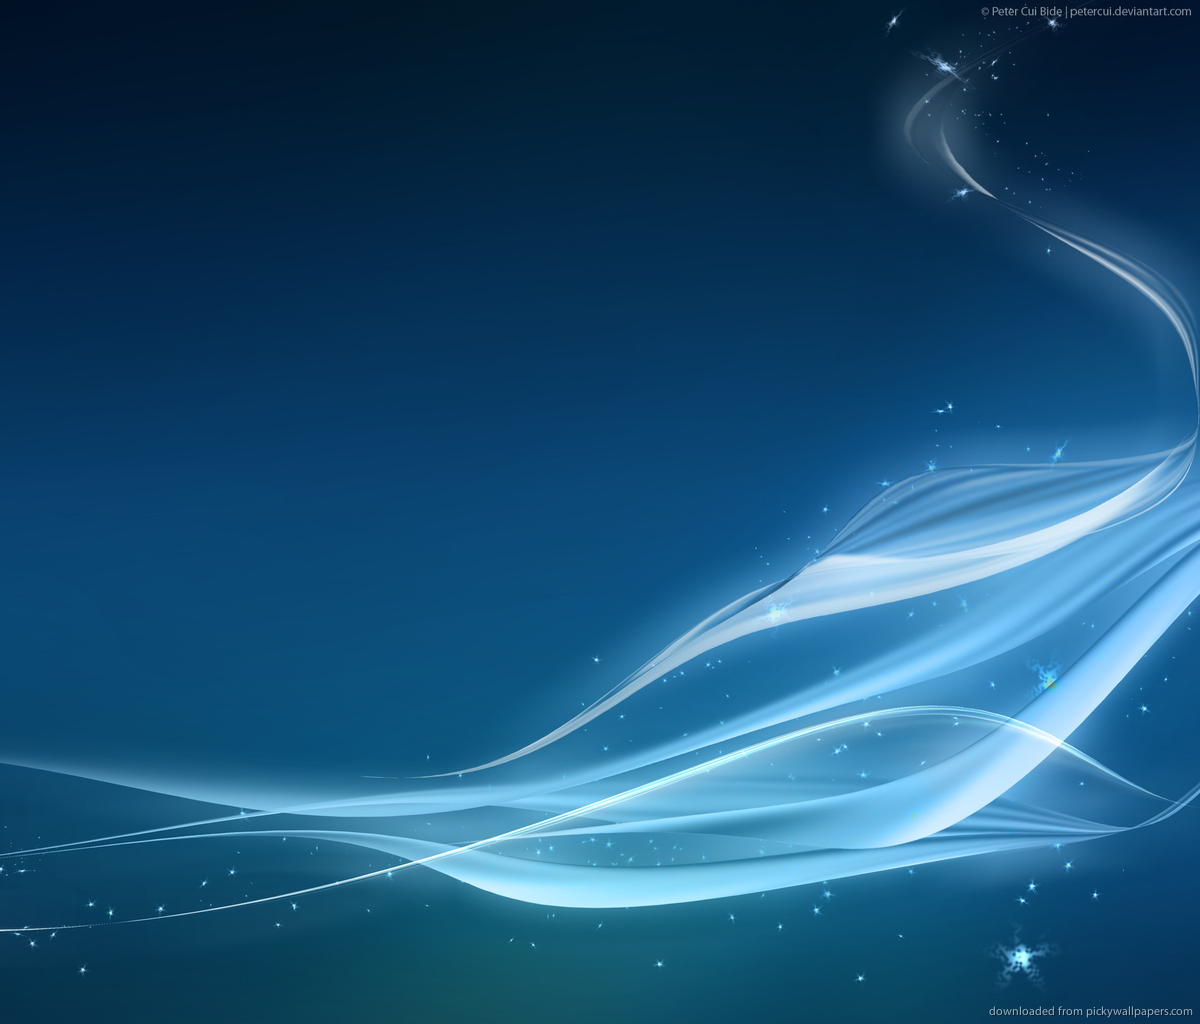 Blue Abstract Sparkly Waves Wallpaper For Samsung Galaxy Tab